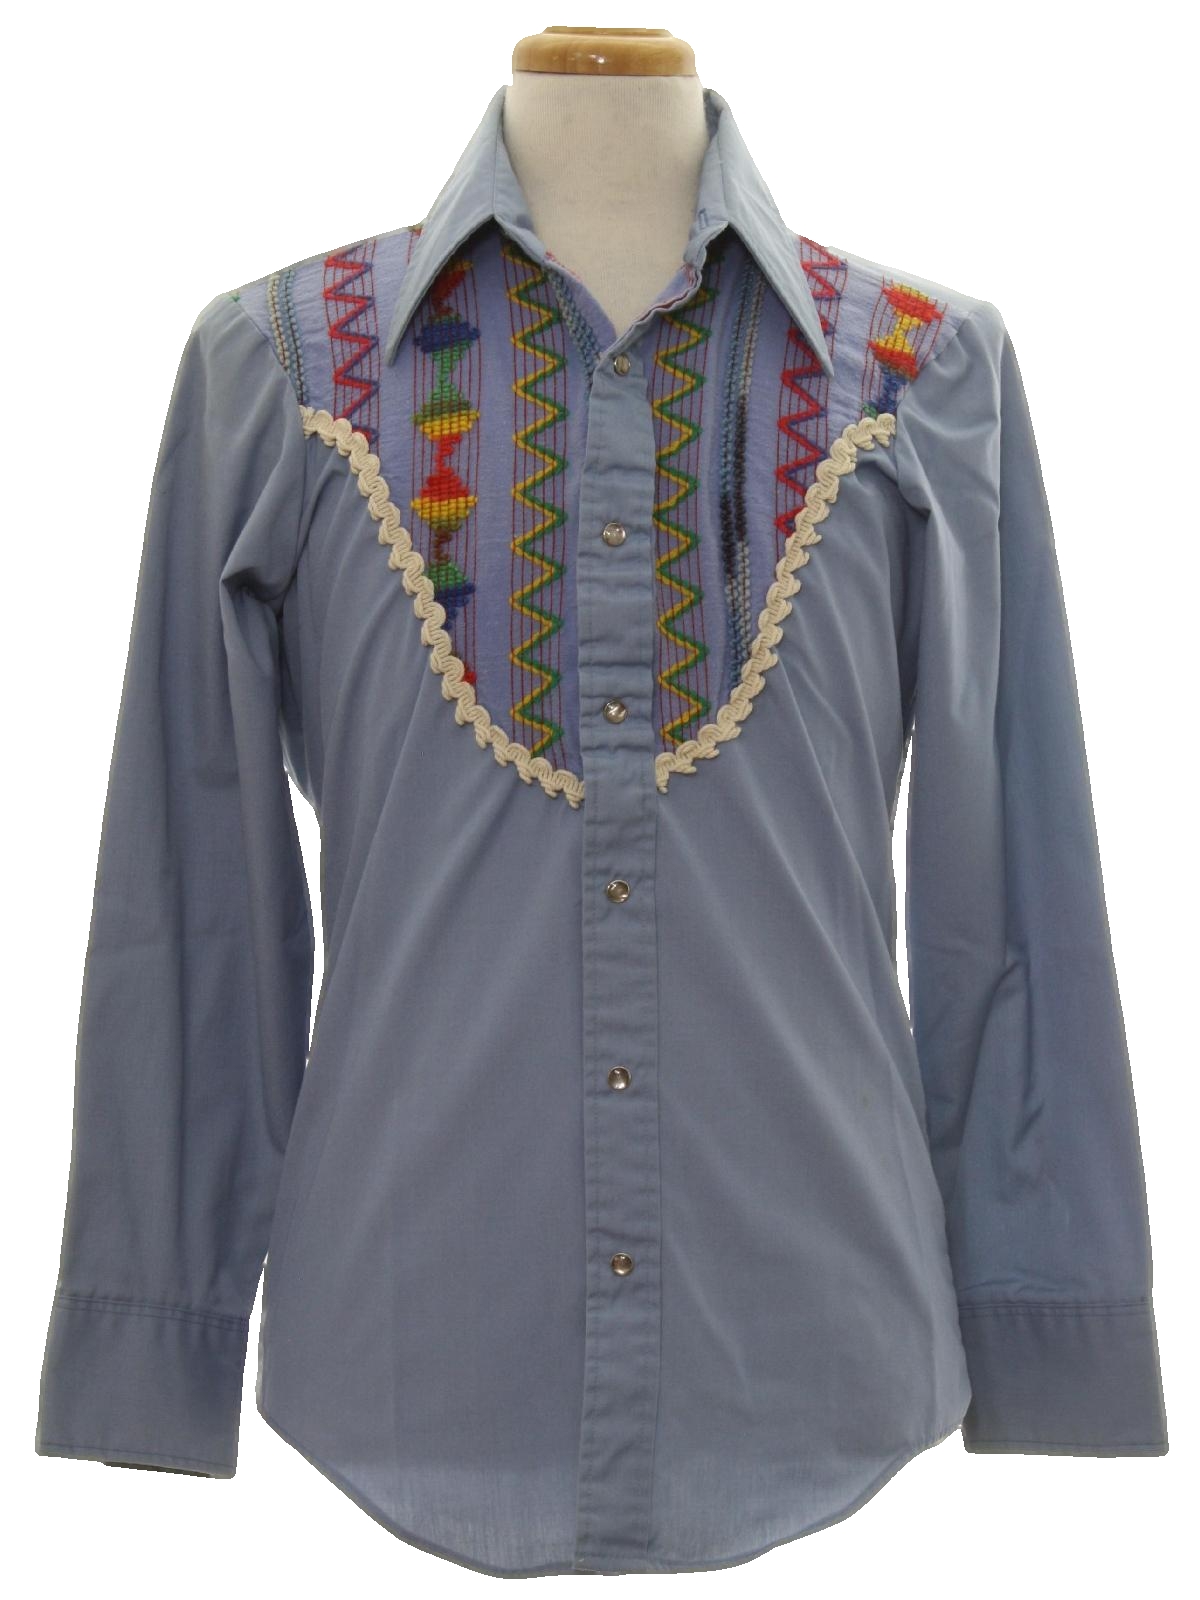 Sixties Vintage Western Shirt: Late 60s -Manchester Shirts Ltd ...